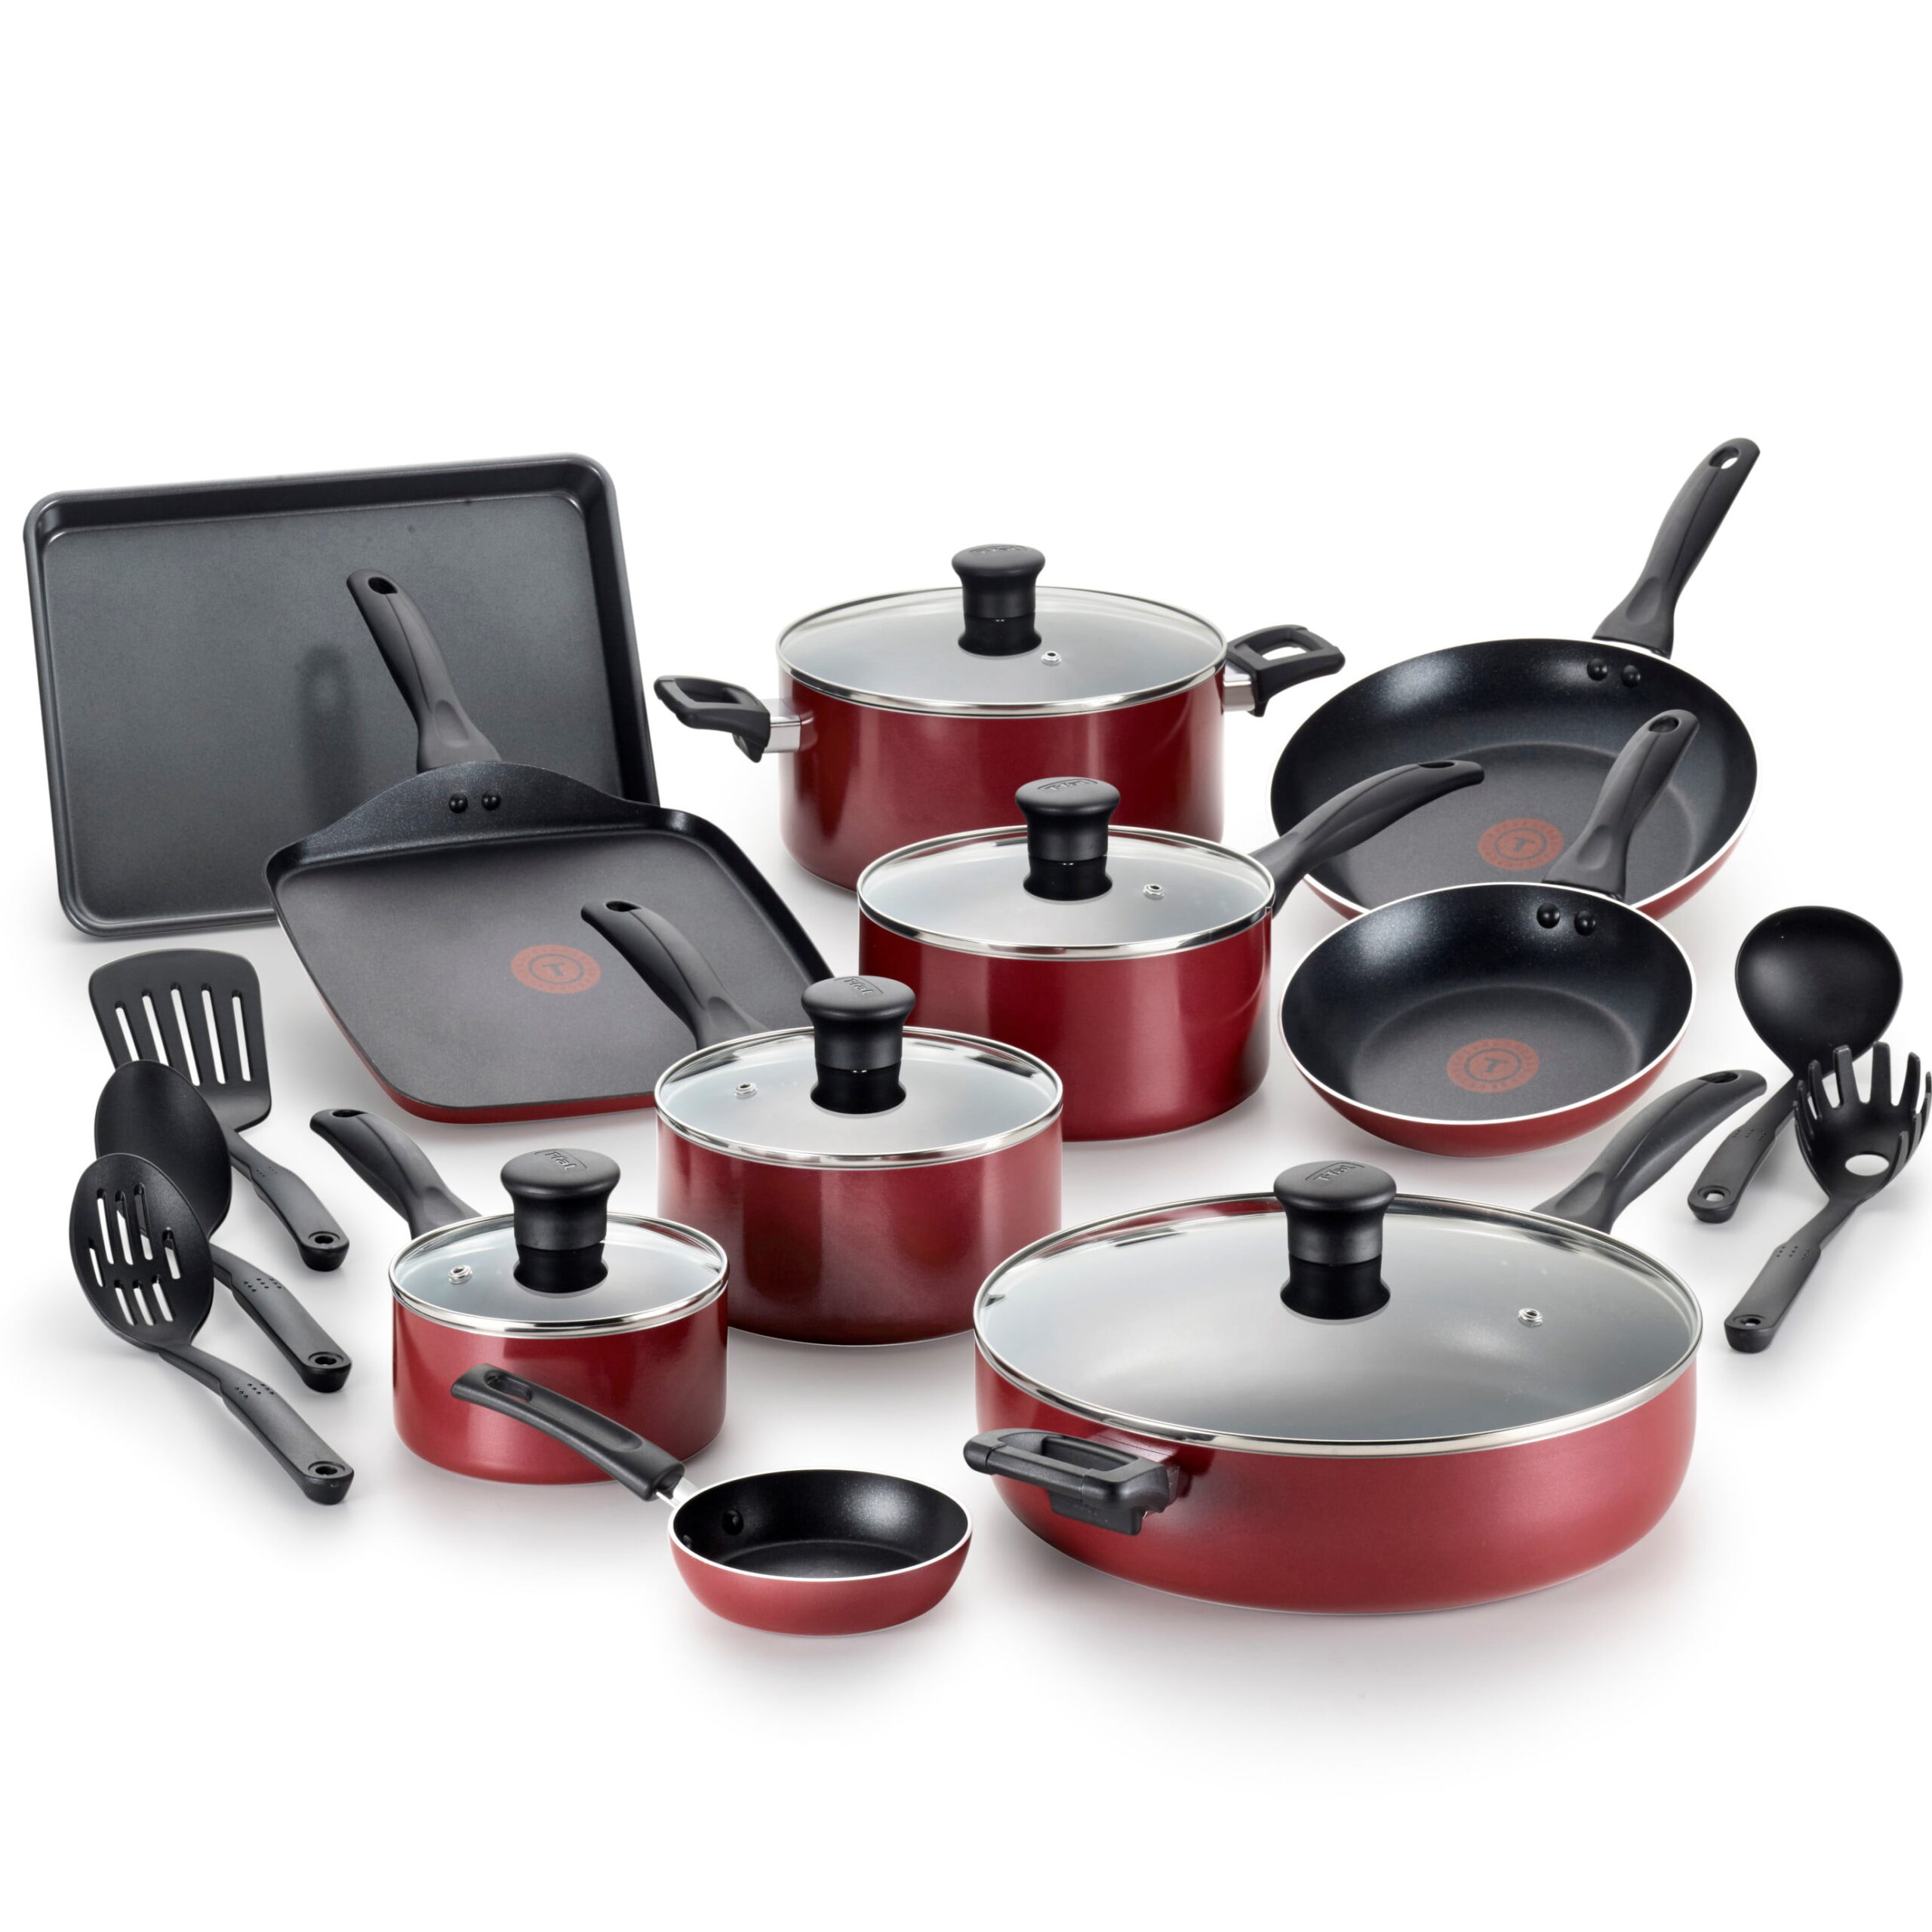 T-fal Easy Care Nonstick Cookware, Jumbo Cooker, 5 Quart, Red